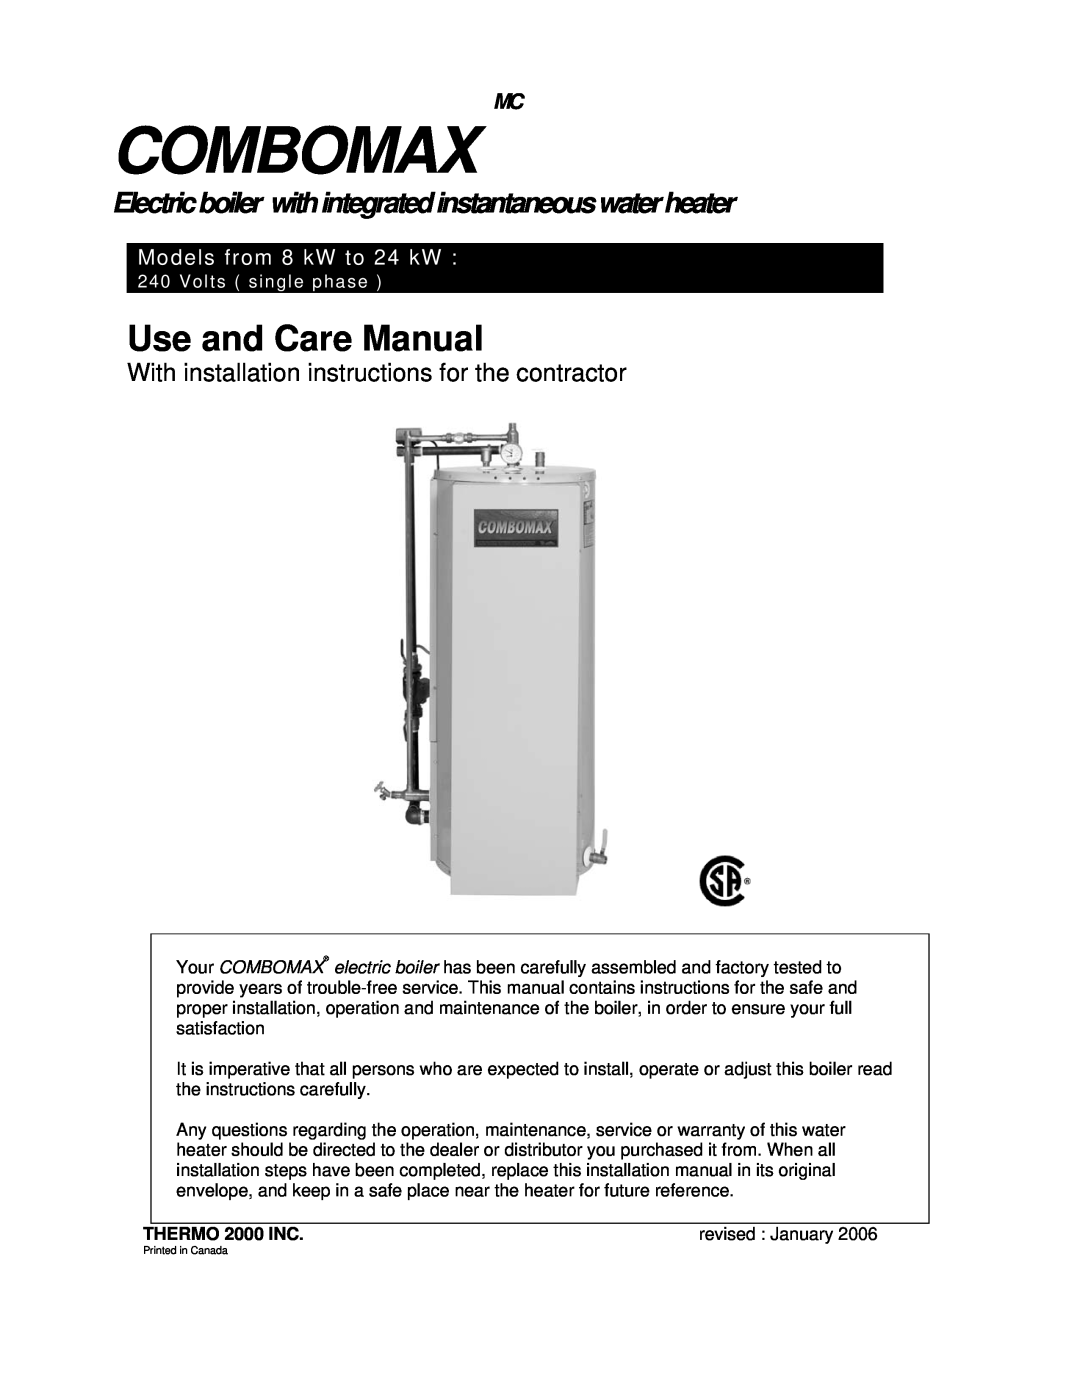 Thermo Products Models from 8 kW to 24 kW : 240 Volts ( single phase ) installation instructions Combomax 